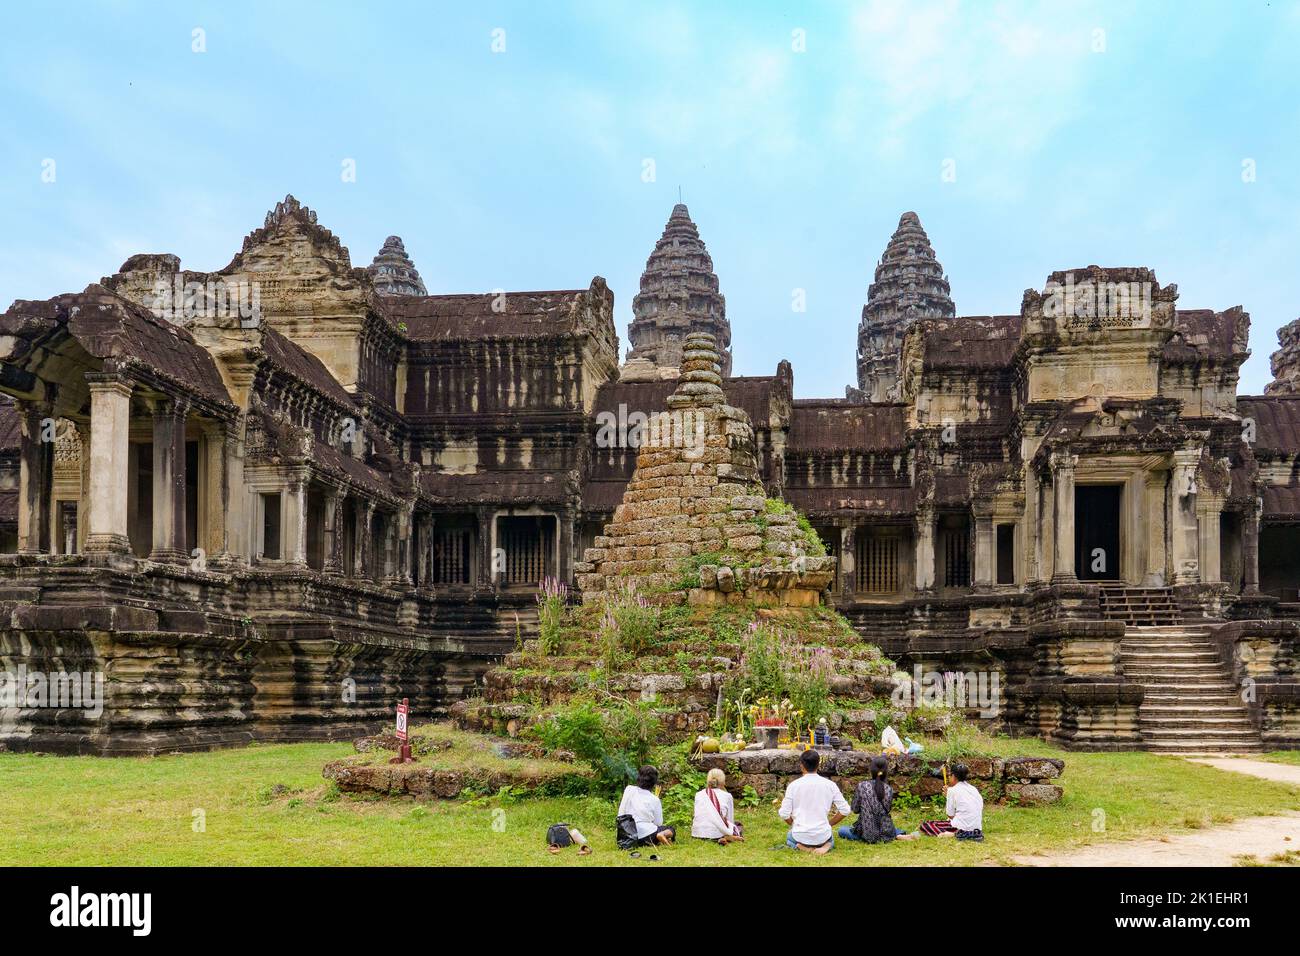 Cambodia. Siem Reap Province. People praying at small temple at Angkor Wat (Temple City). A Buddhist and temple complex in Cambodia Stock Photo